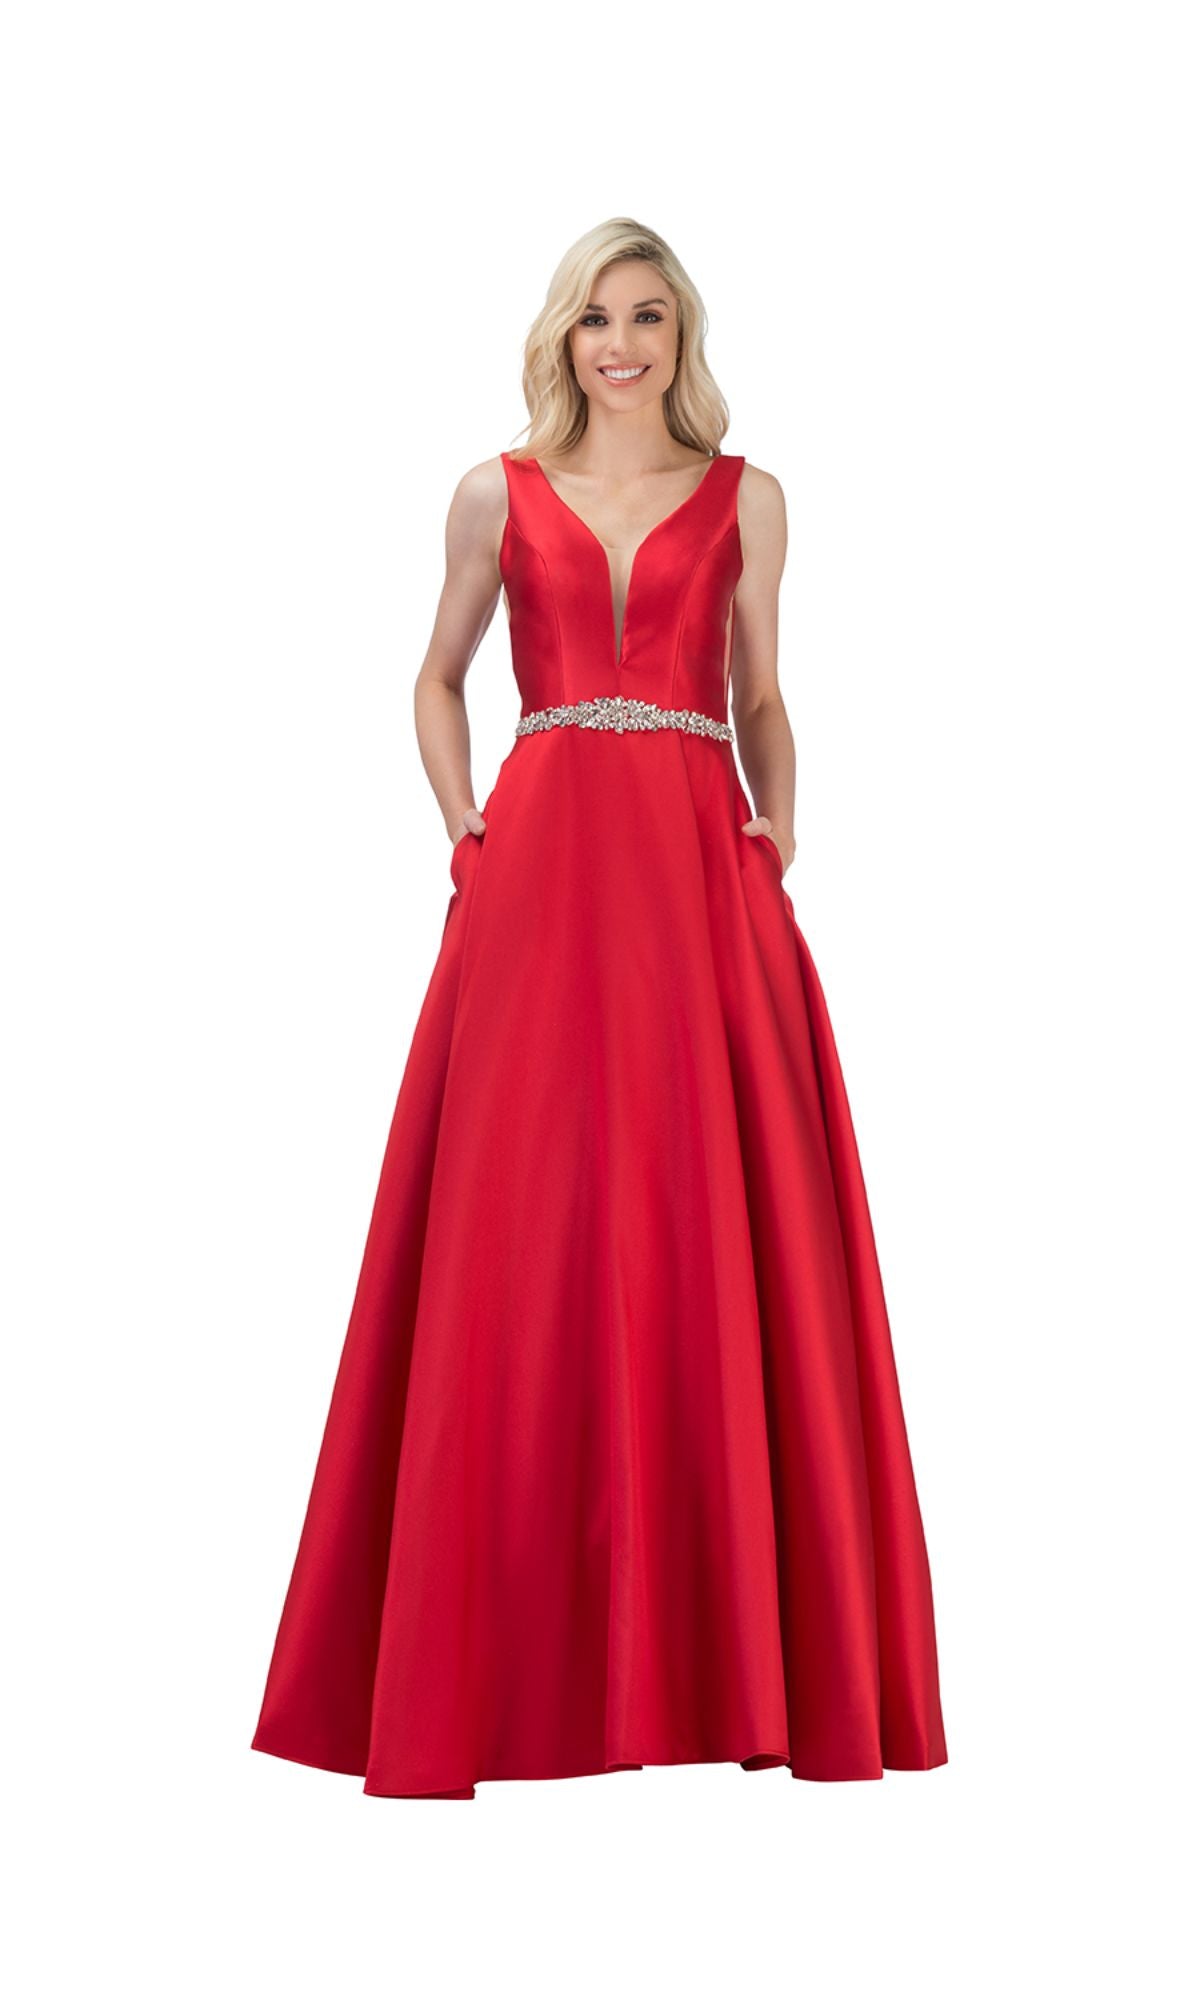 Long Prom Dress CC3021 by Chicas